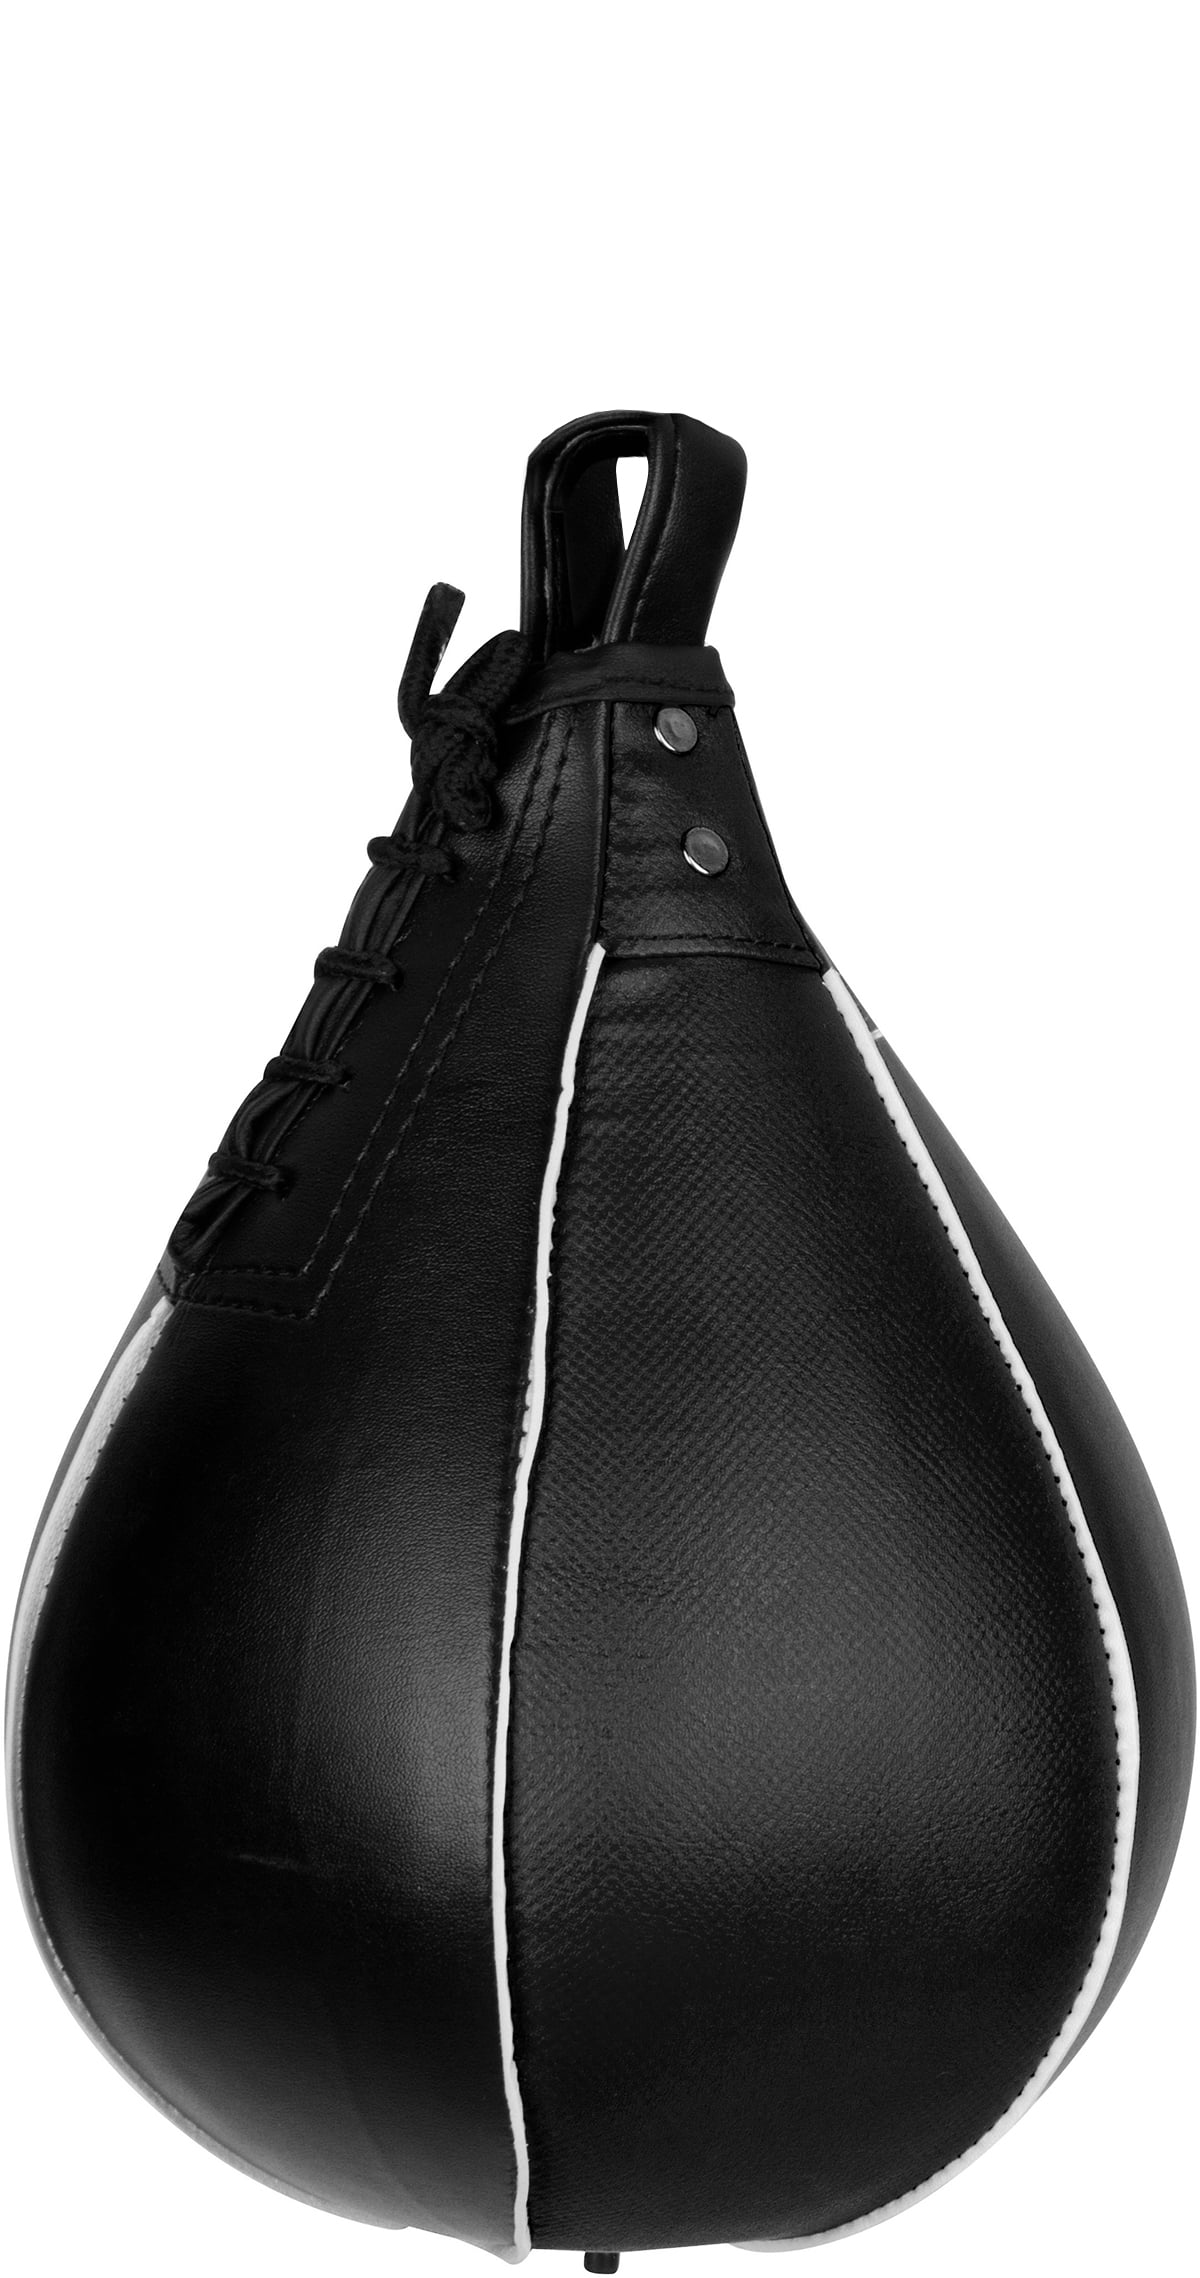 Boxing Speed Bag For Workout Training by Trademark Innovations - 0